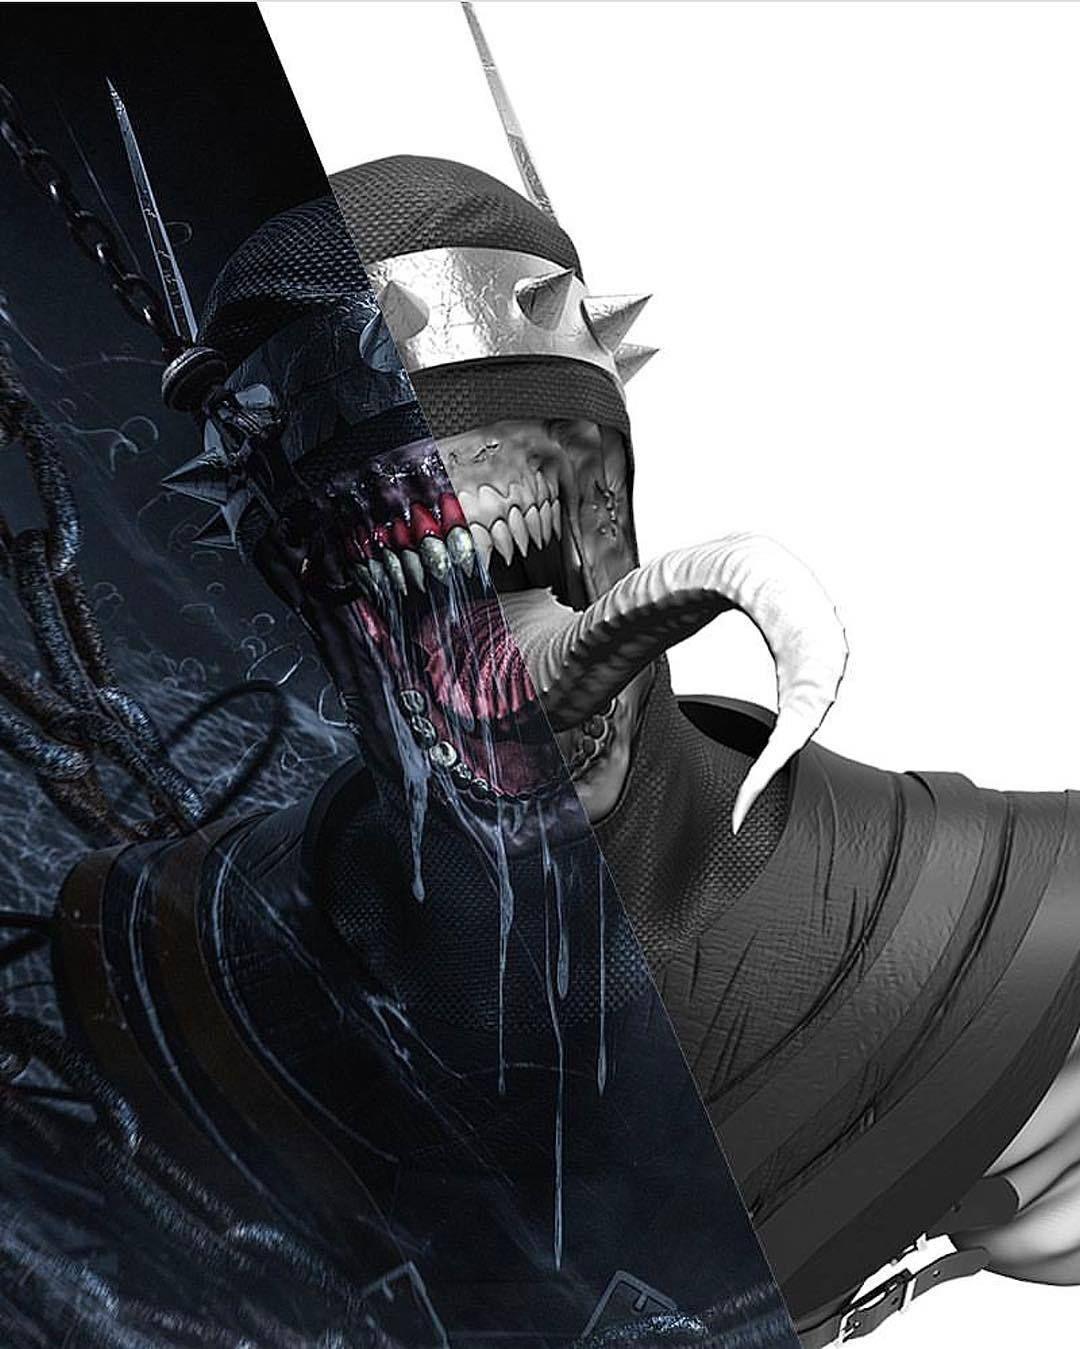 The Batman Who Laughs by the amazing Download this image